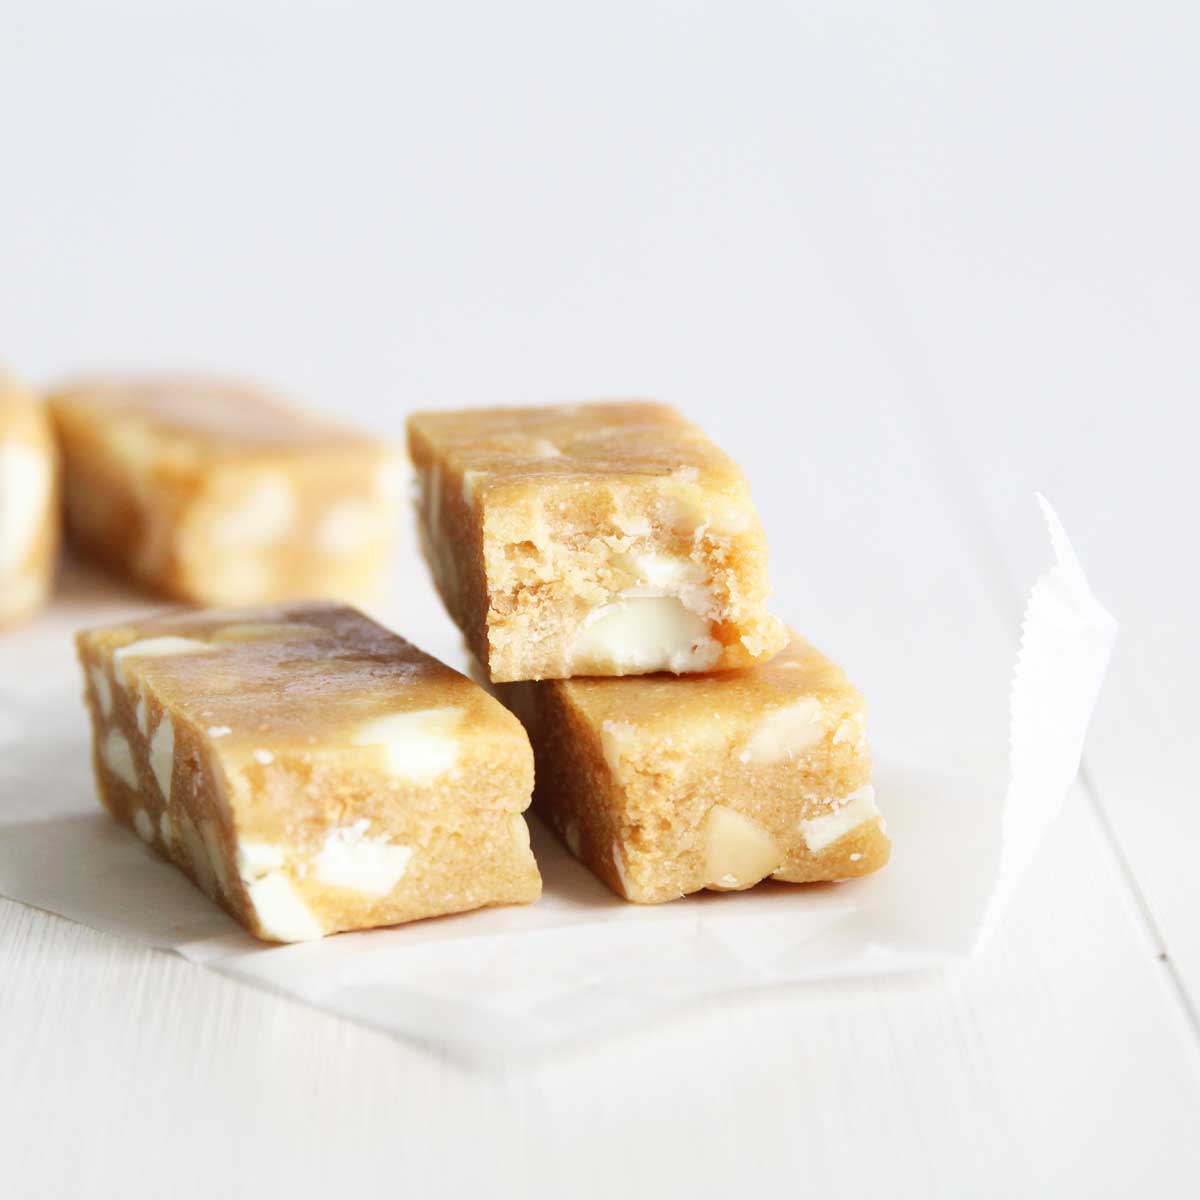 Chunky White Chocolate Macadamia Protein Bars Recipe (made with Collagen Peptides) - Almond Joy Protein Bars